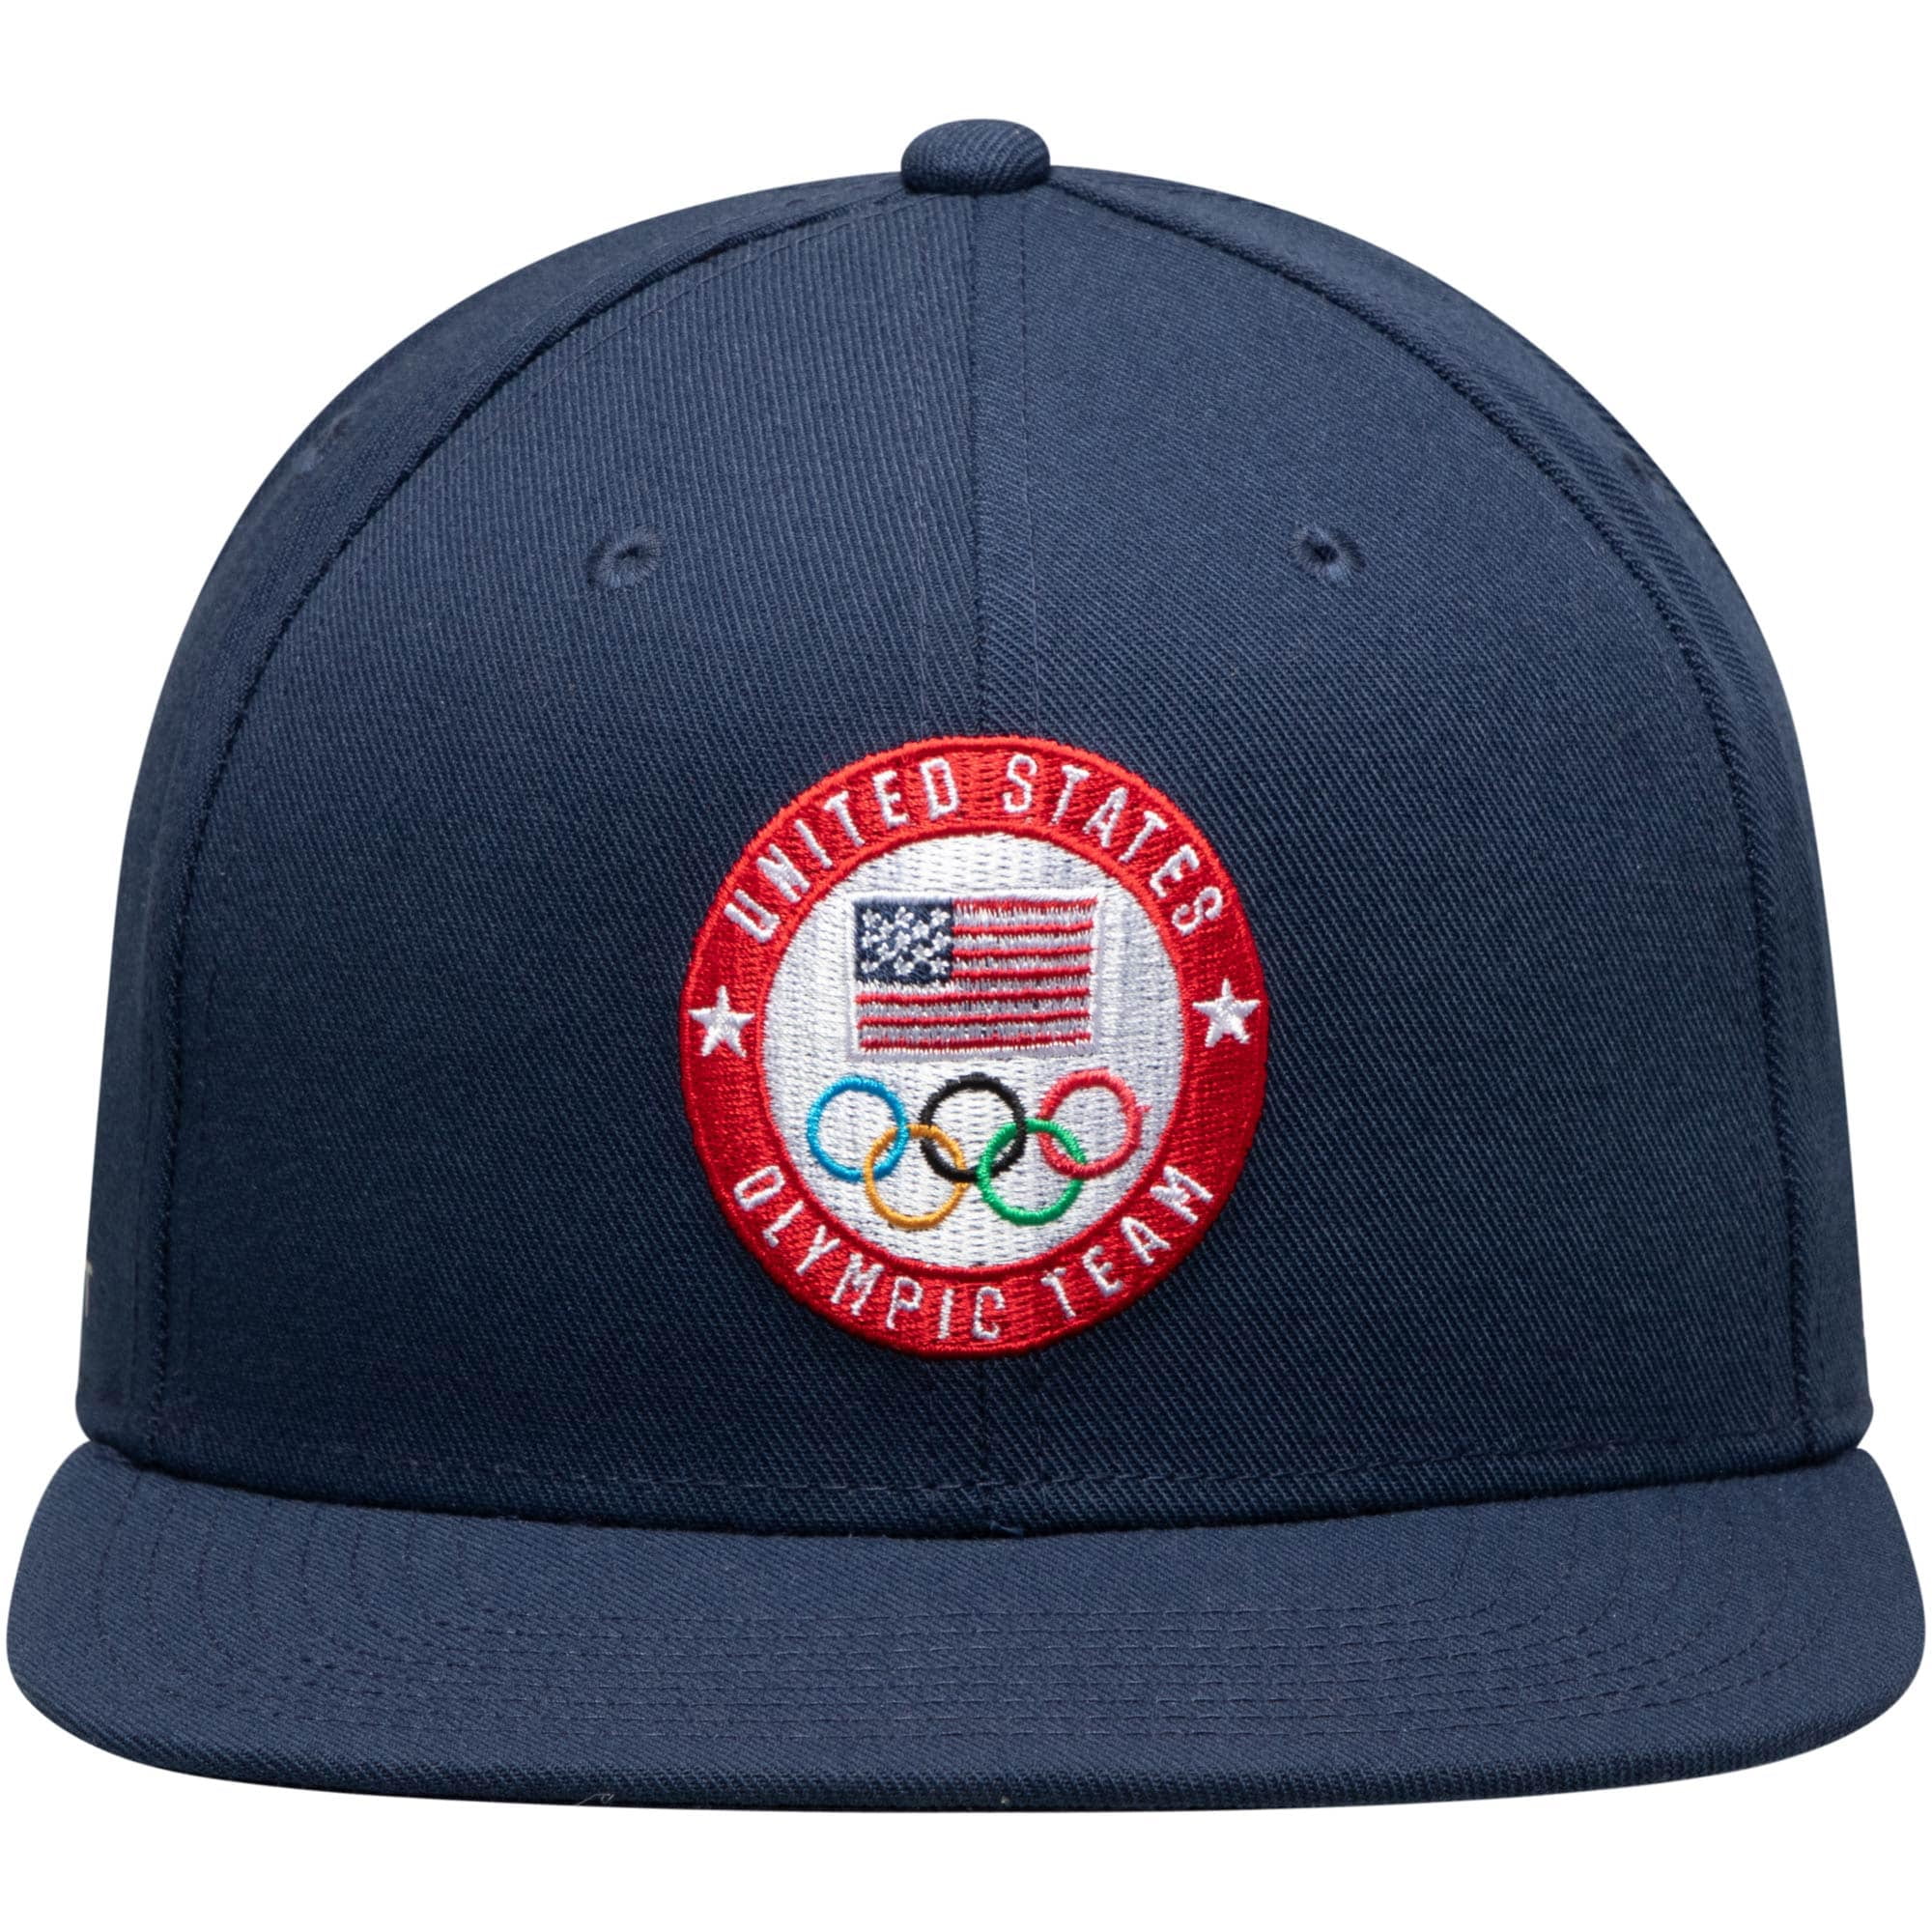 Team Usa Olympics Hat Rings Red White Blue Baseball Cap Adjustable Men S Hats Men S Accessories